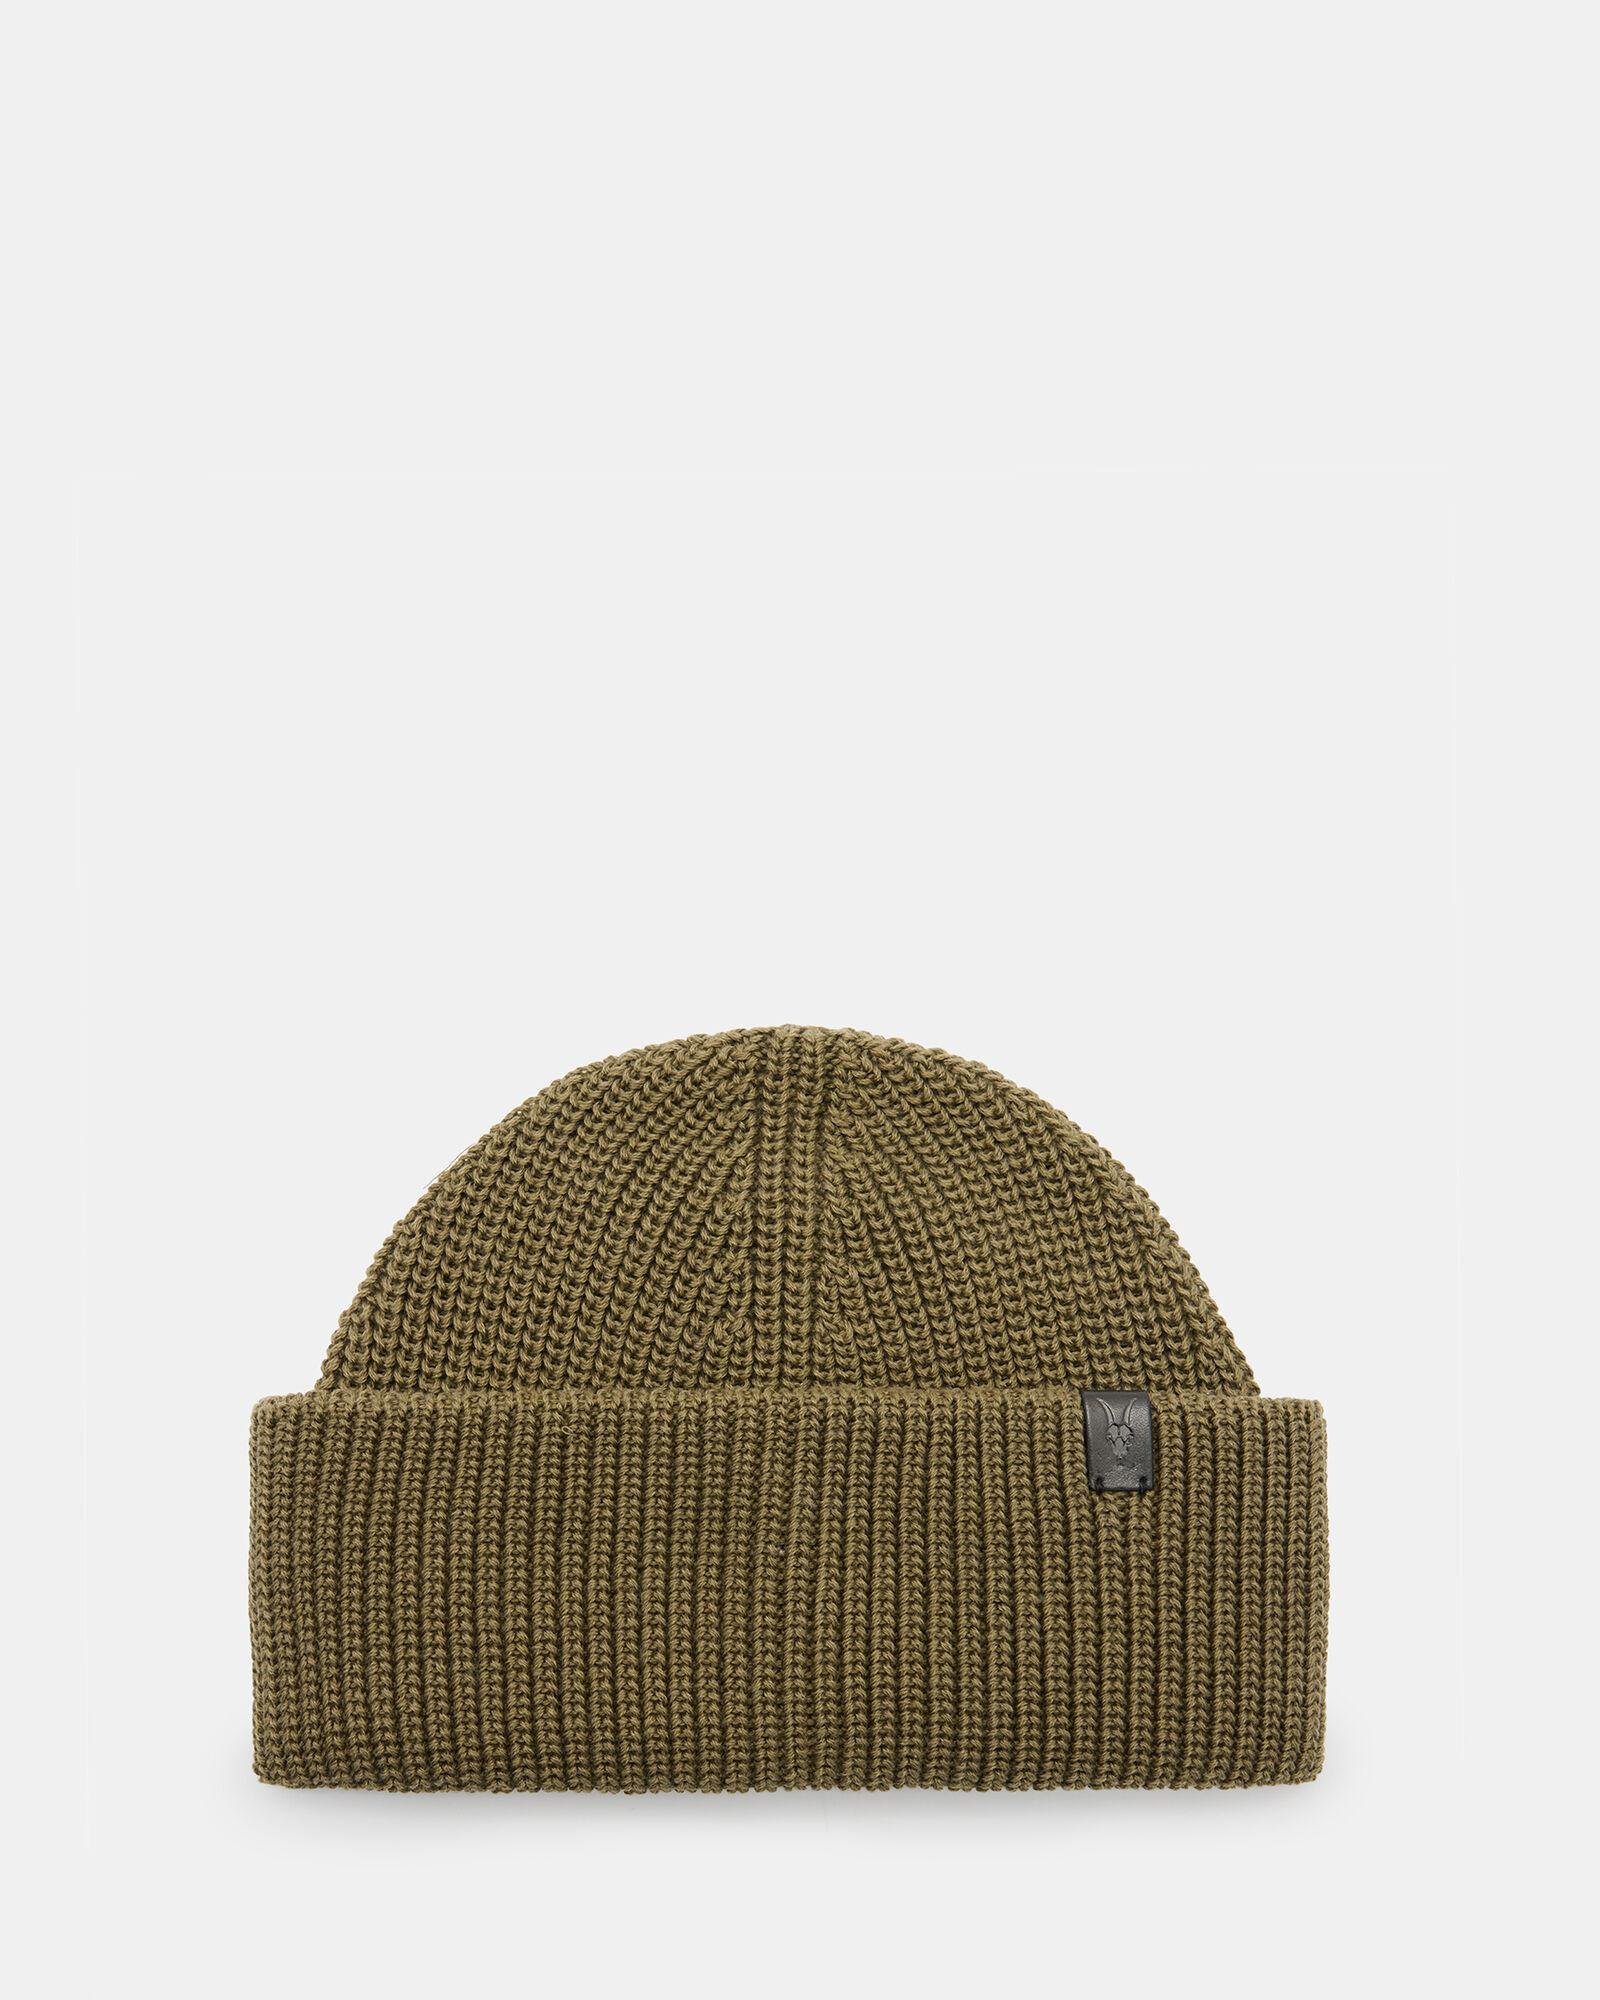 West Short Embossed Beanie by ALLSAINTS